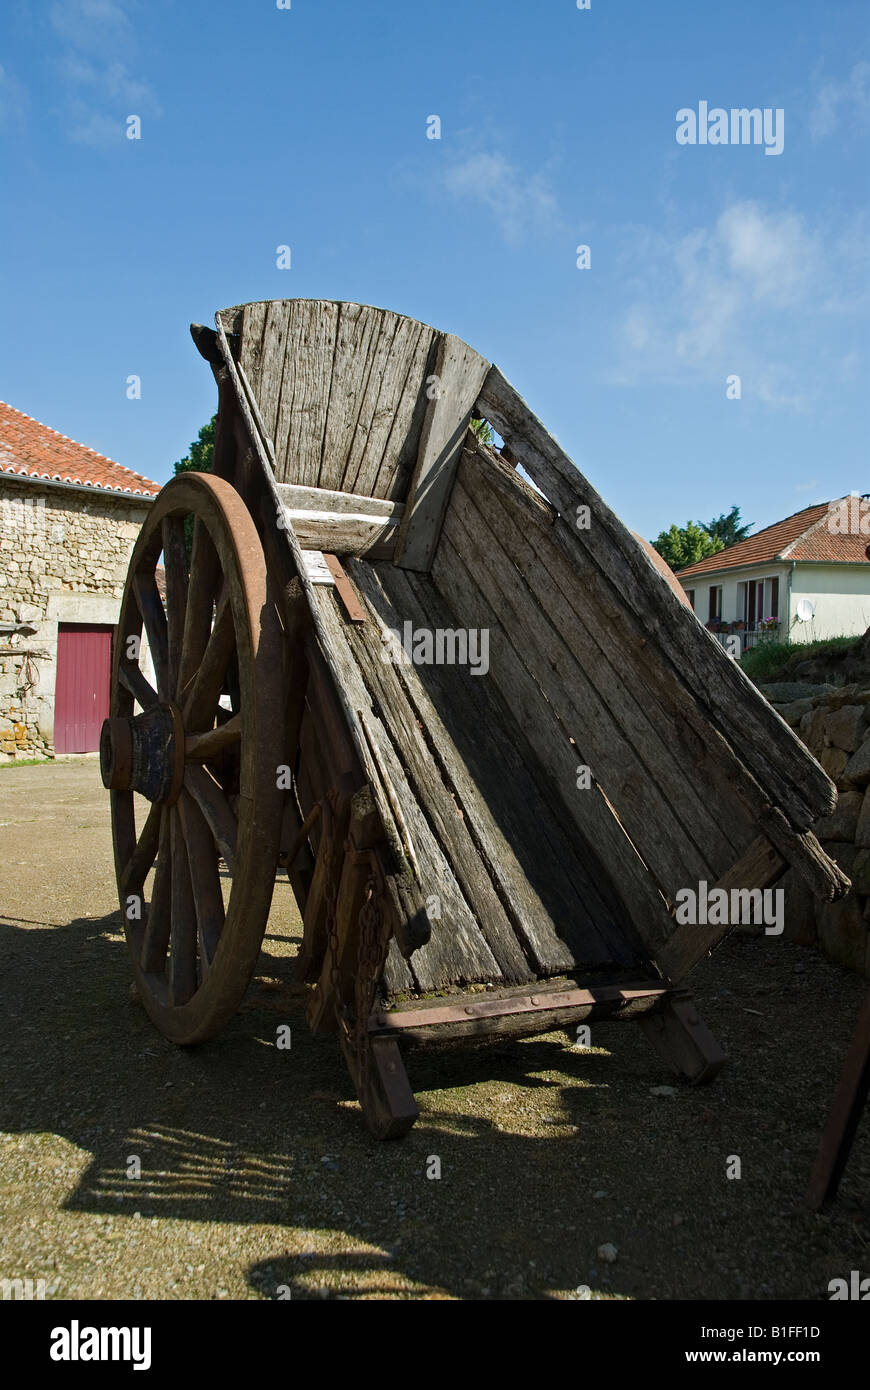 Stock photo of an old wooden cart in the French village of Montrol Senard in the Limousin region of France Stock Photo